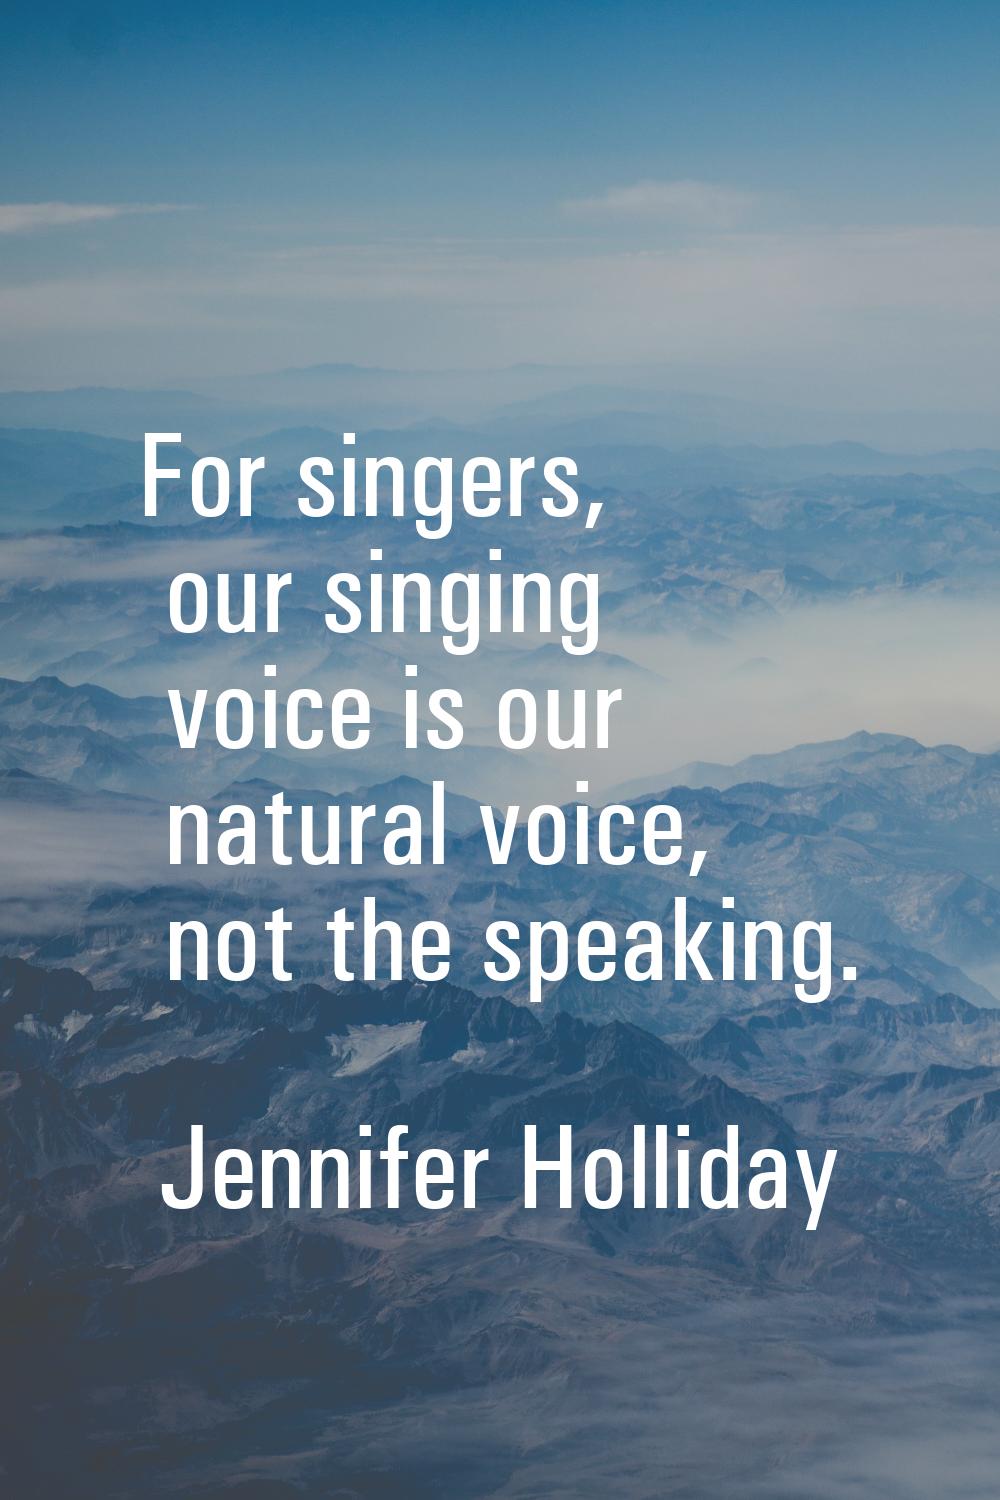 For singers, our singing voice is our natural voice, not the speaking.